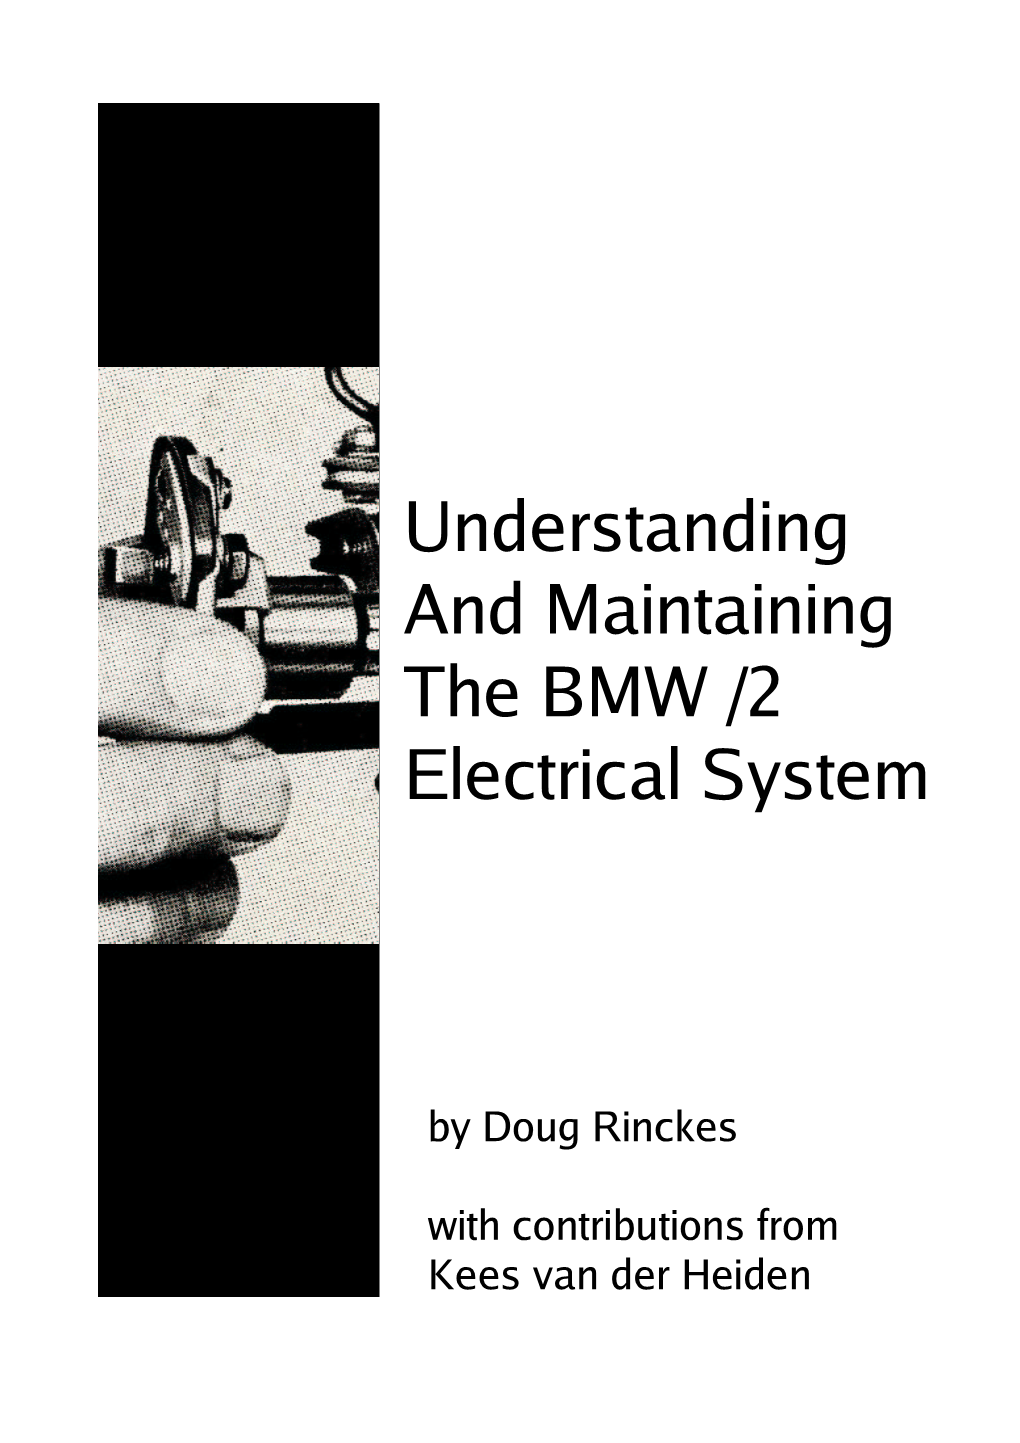 Understanding and Maintaining the BMW /2 Electrical System